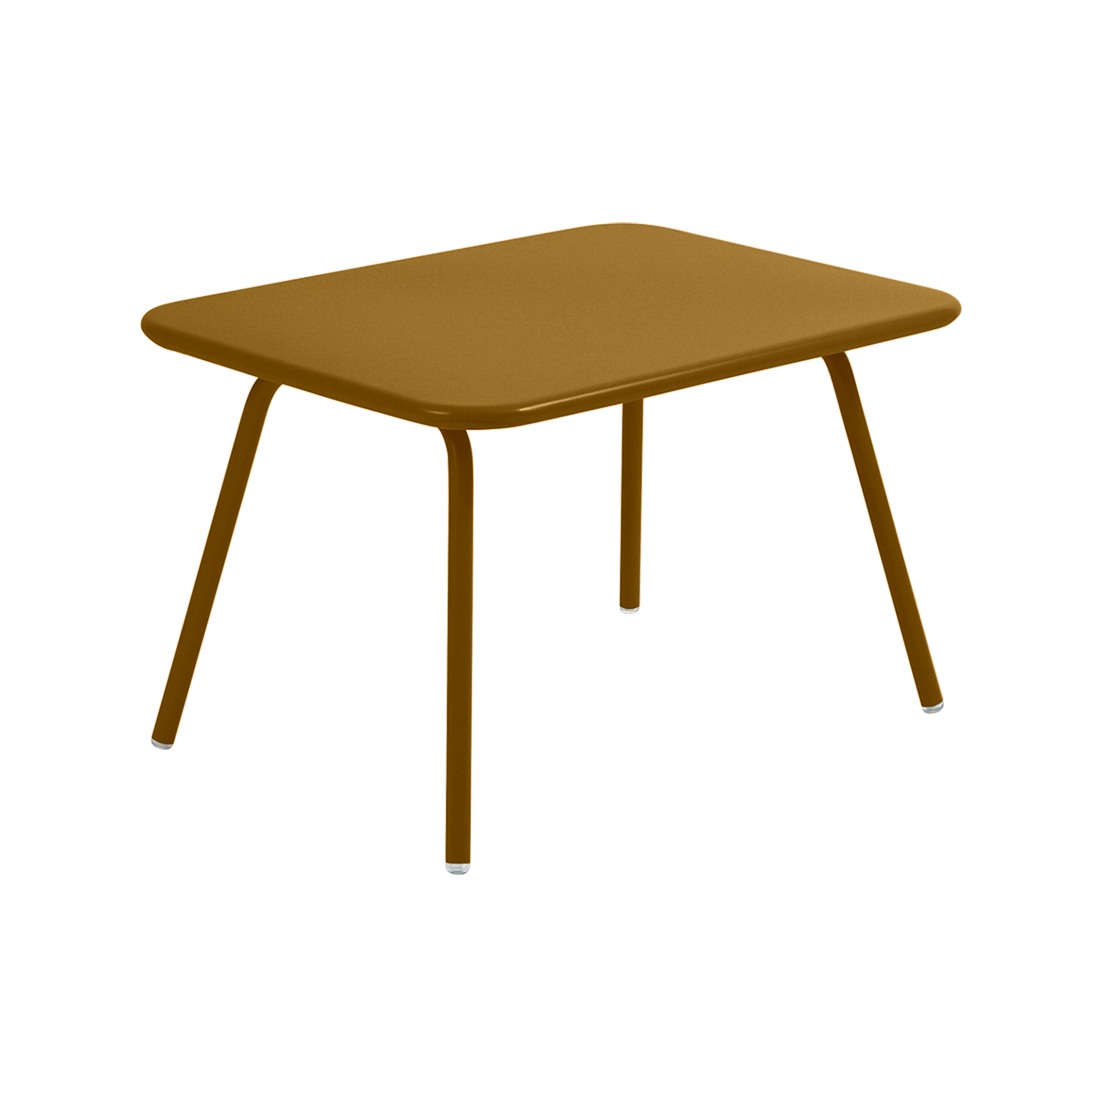 LUXEMBOURG KID TABLE 76 X 55.5 CM